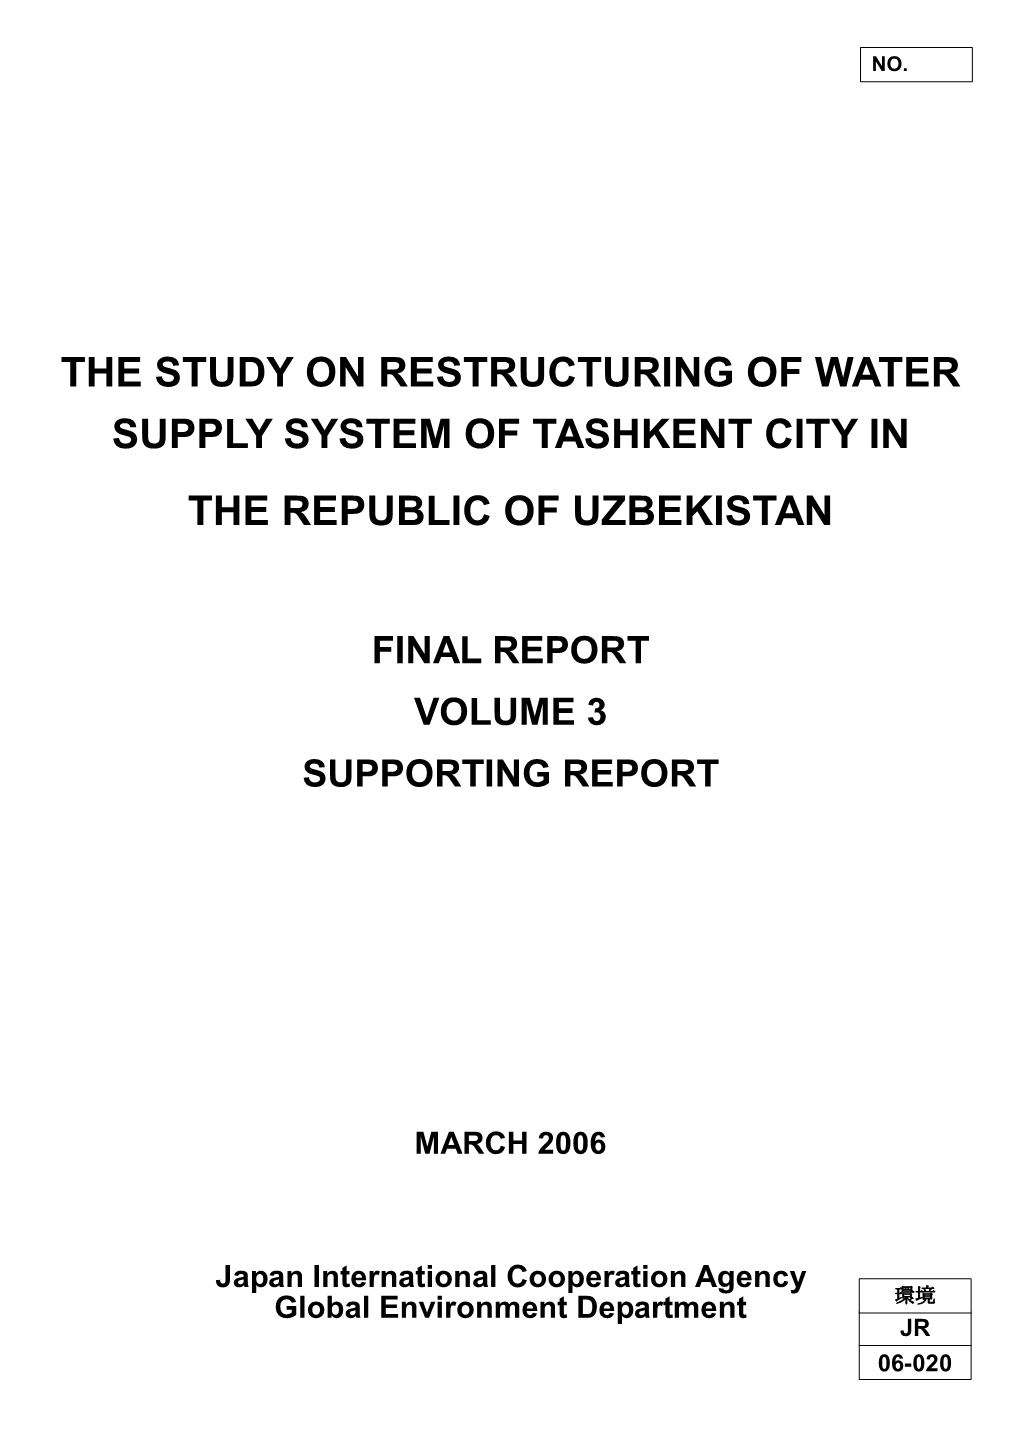 The Study on Restructuring of Water Supply System of Tashkent City in the Republic of Uzbekistan